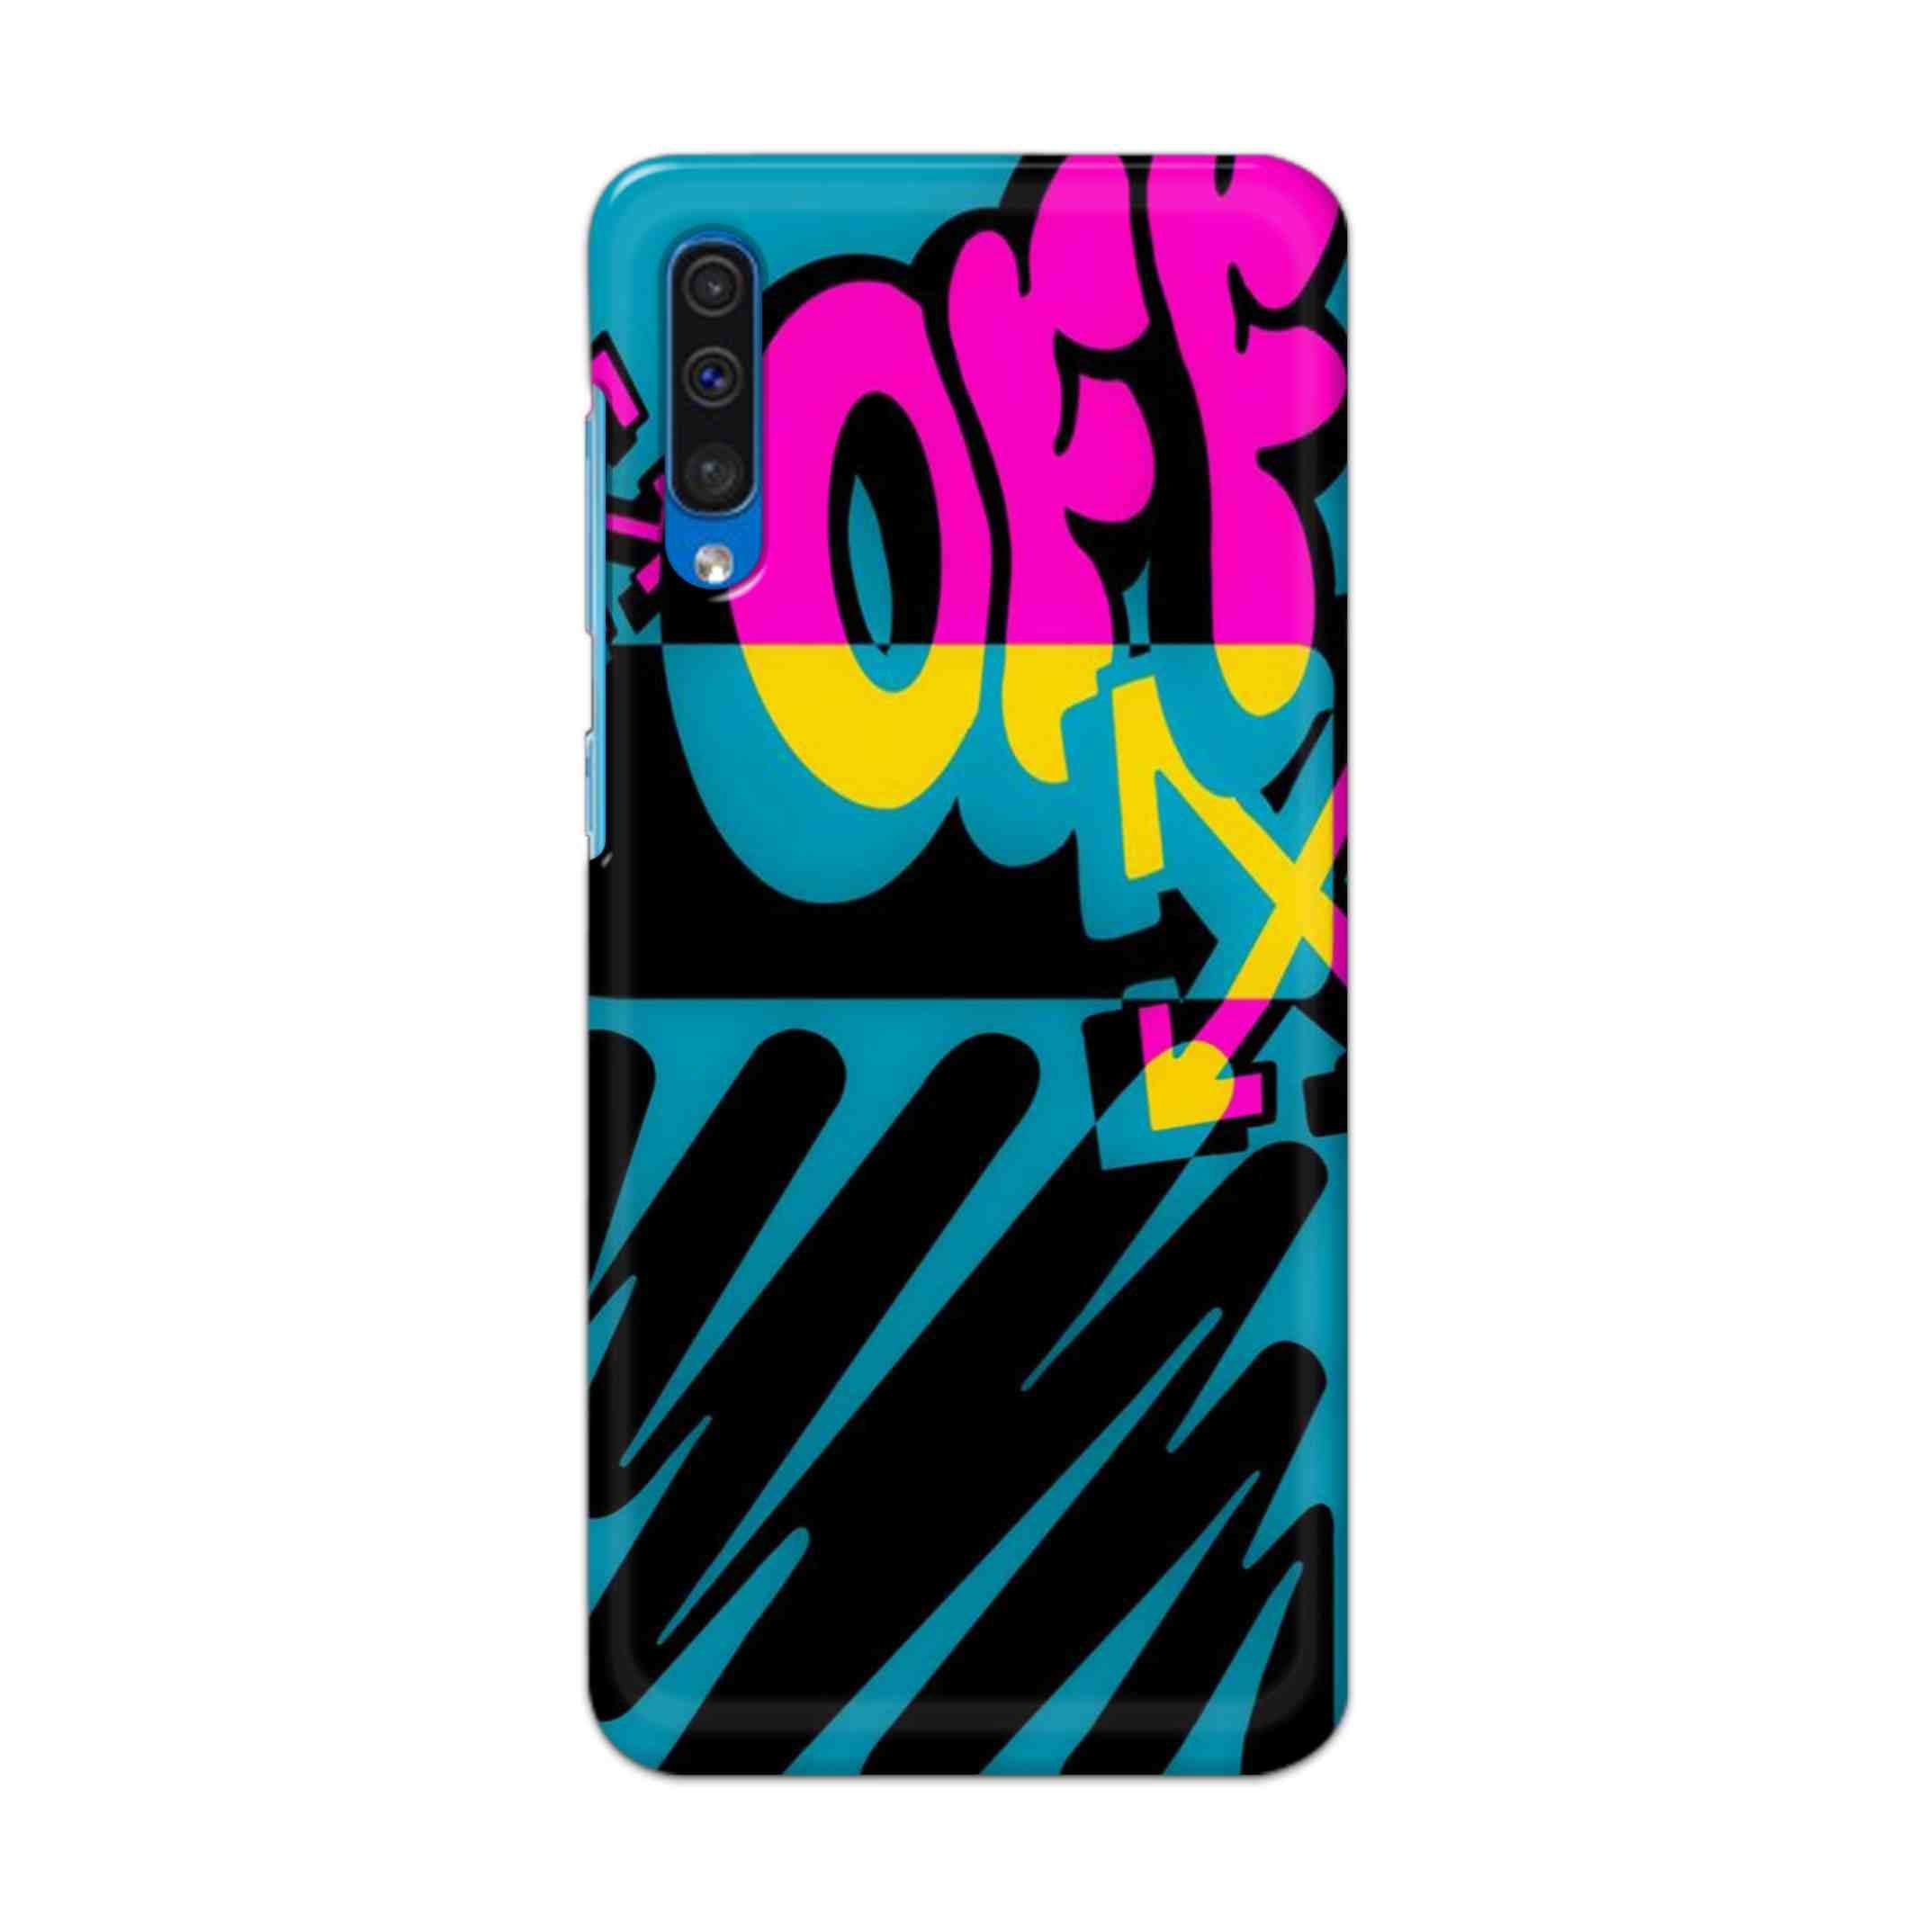 Buy Off Hard Back Mobile Phone Case Cover For Samsung Galaxy A50 / A50s / A30s Online